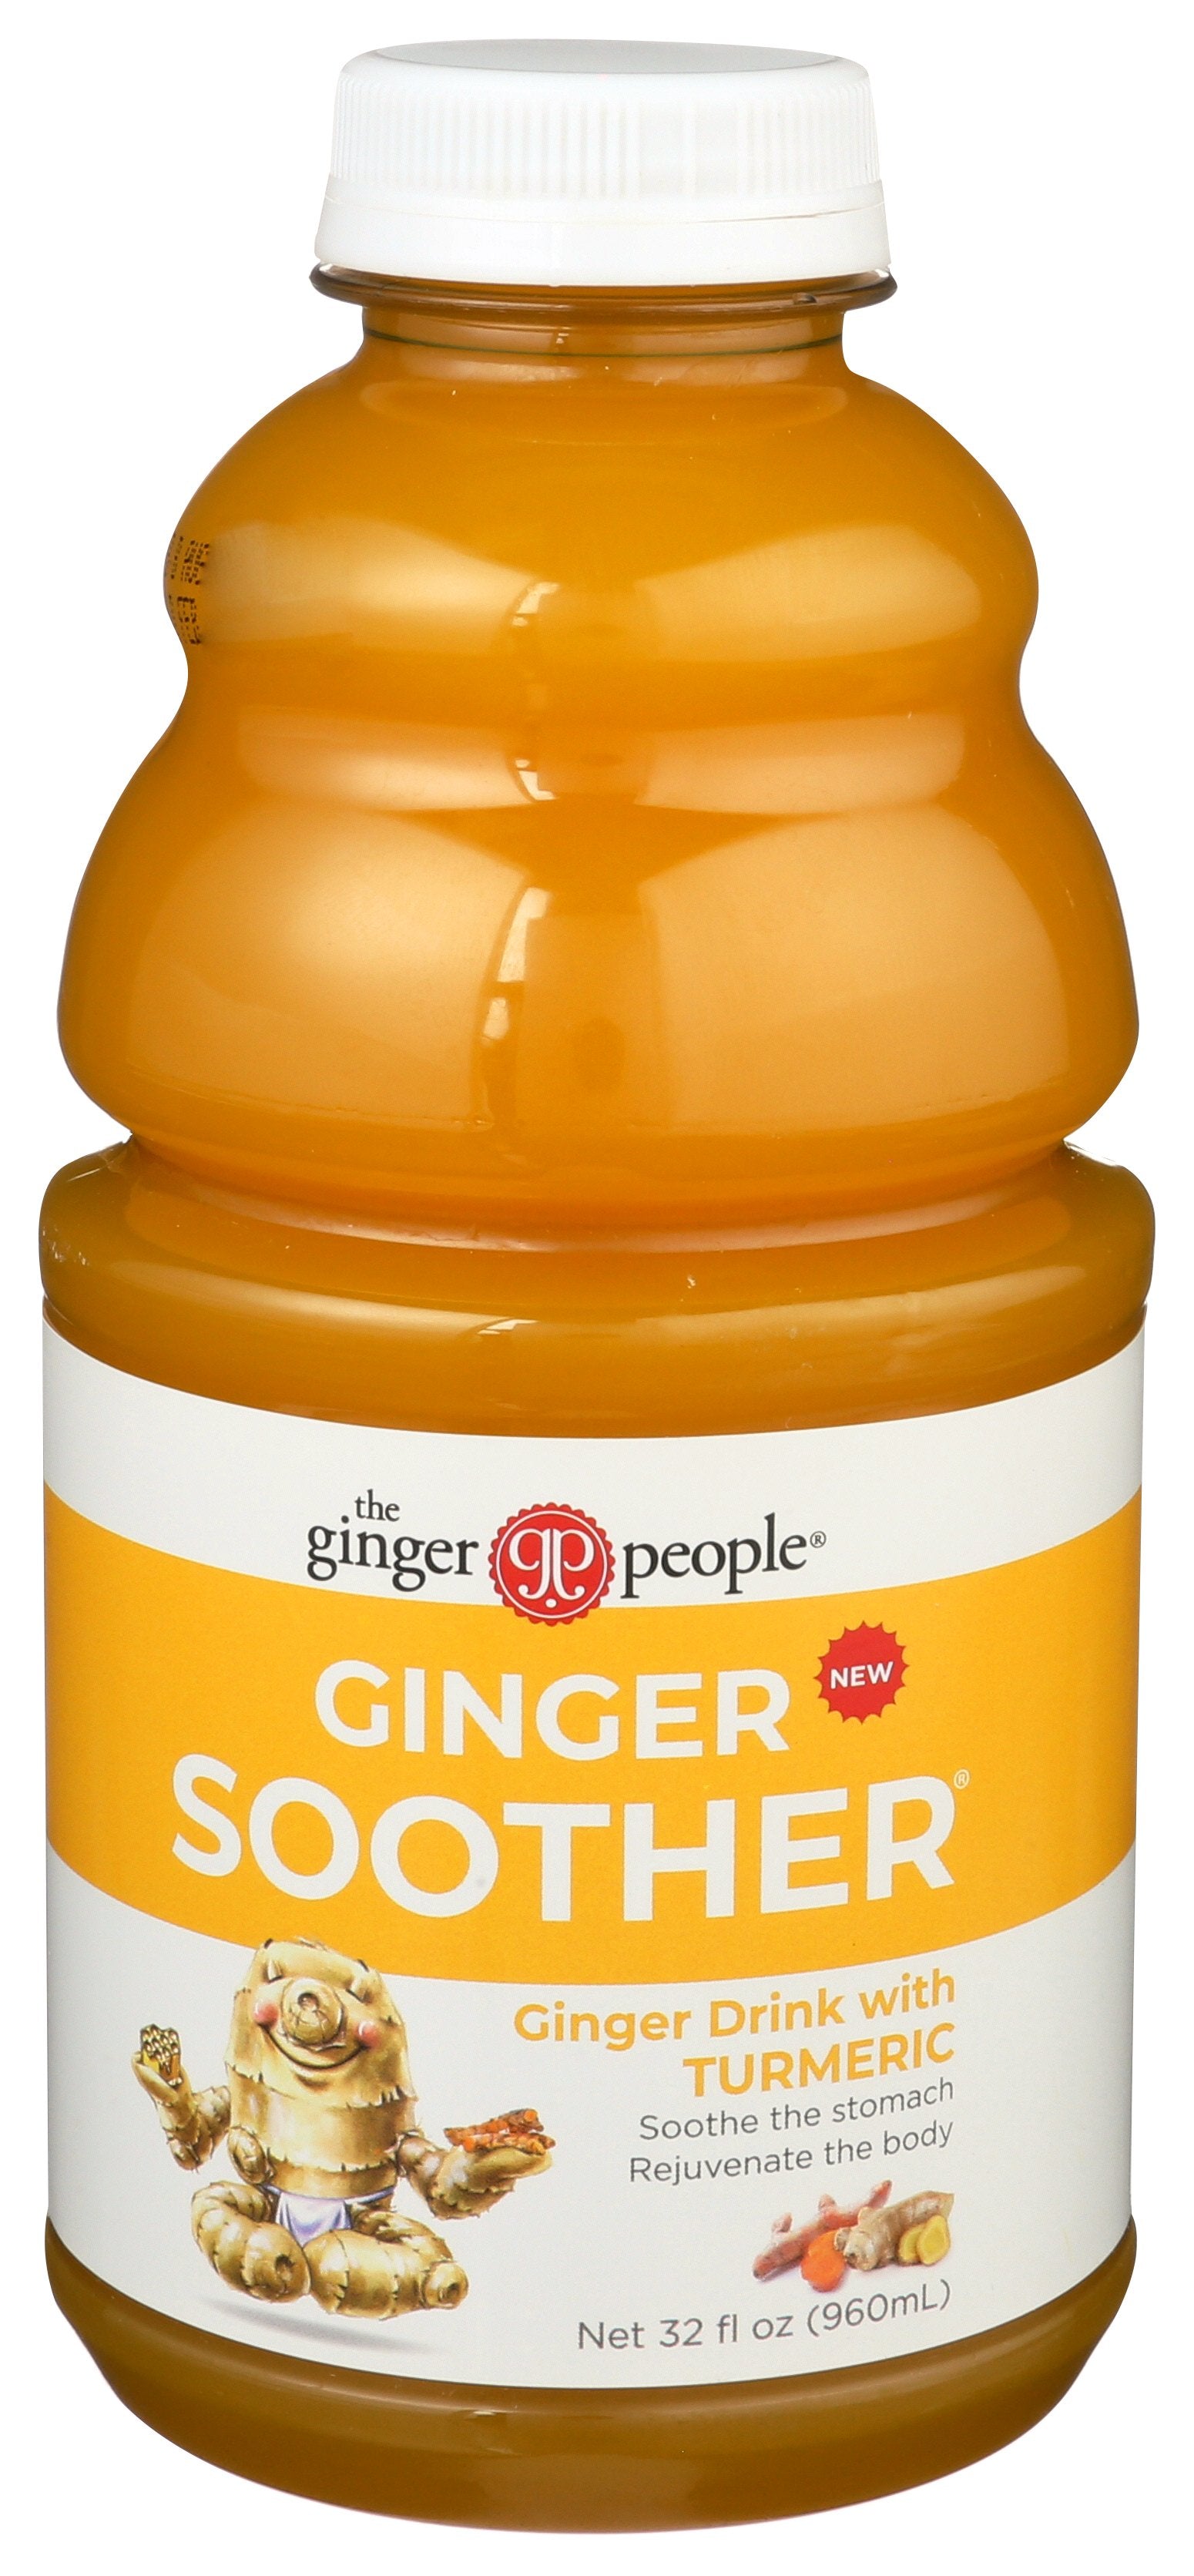 GINGER PEOPLE BEV GNGR TURMERIC SOOTHER - Case of 12